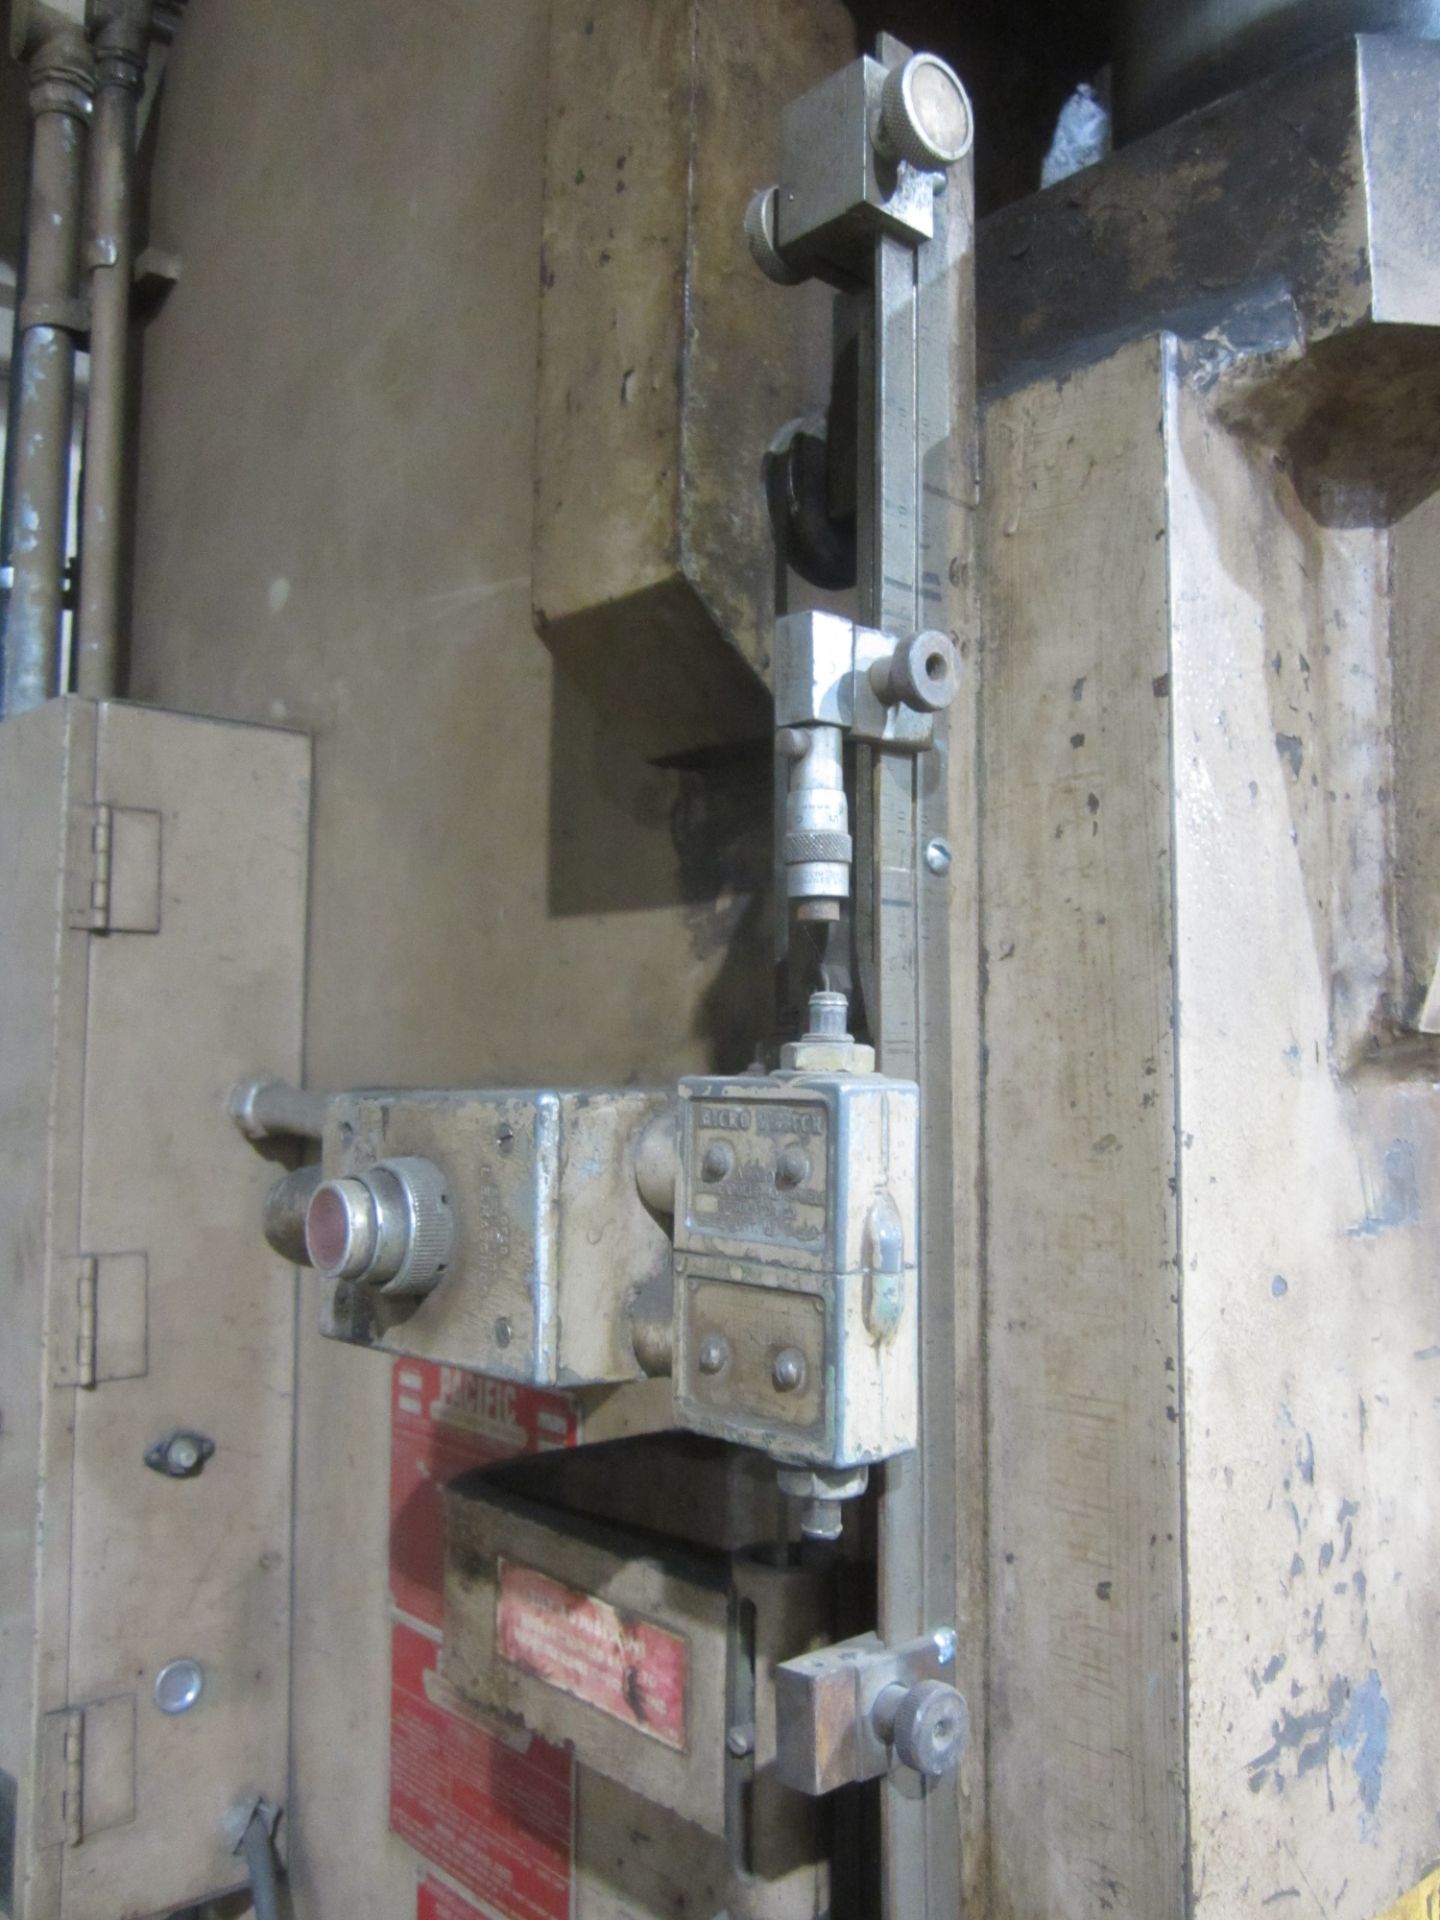 Pacific Model 200-14 Hydraulic Press Brake, s/n 3447, 14' X 200 Ton Capacity, 14' Overall Bed - Image 7 of 11